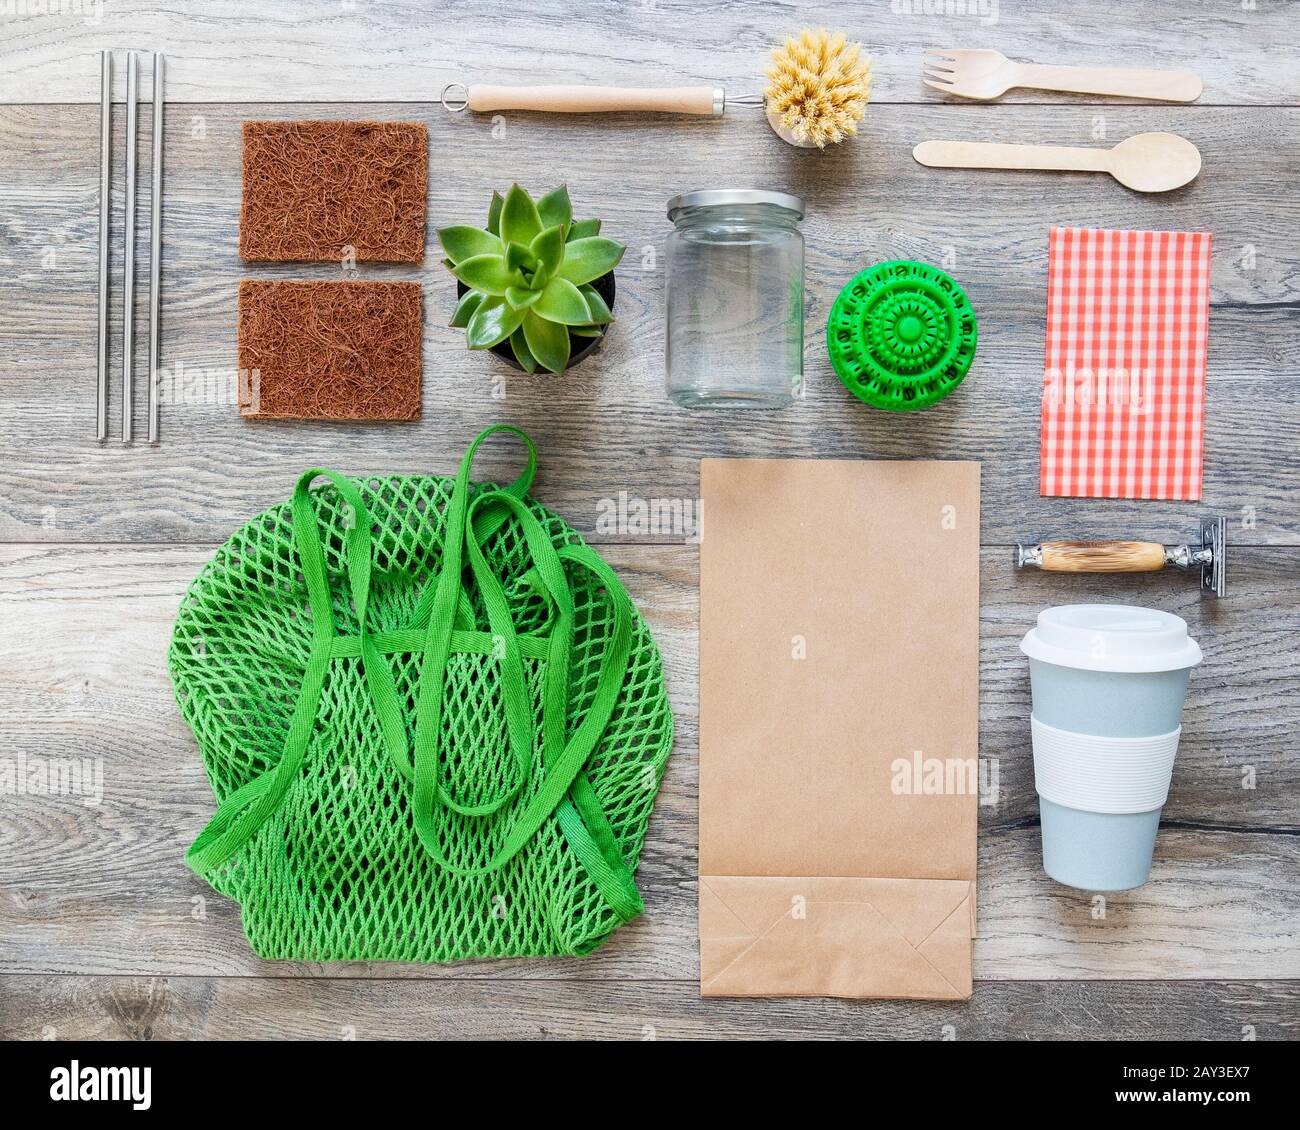 Flat Lay Shot Of Plastic Free Eco Products With Reusable Or Sustainable Zero Waste Products On Wooden Background With Metal Staws Carta Da Taglio In Legno Foto Stock